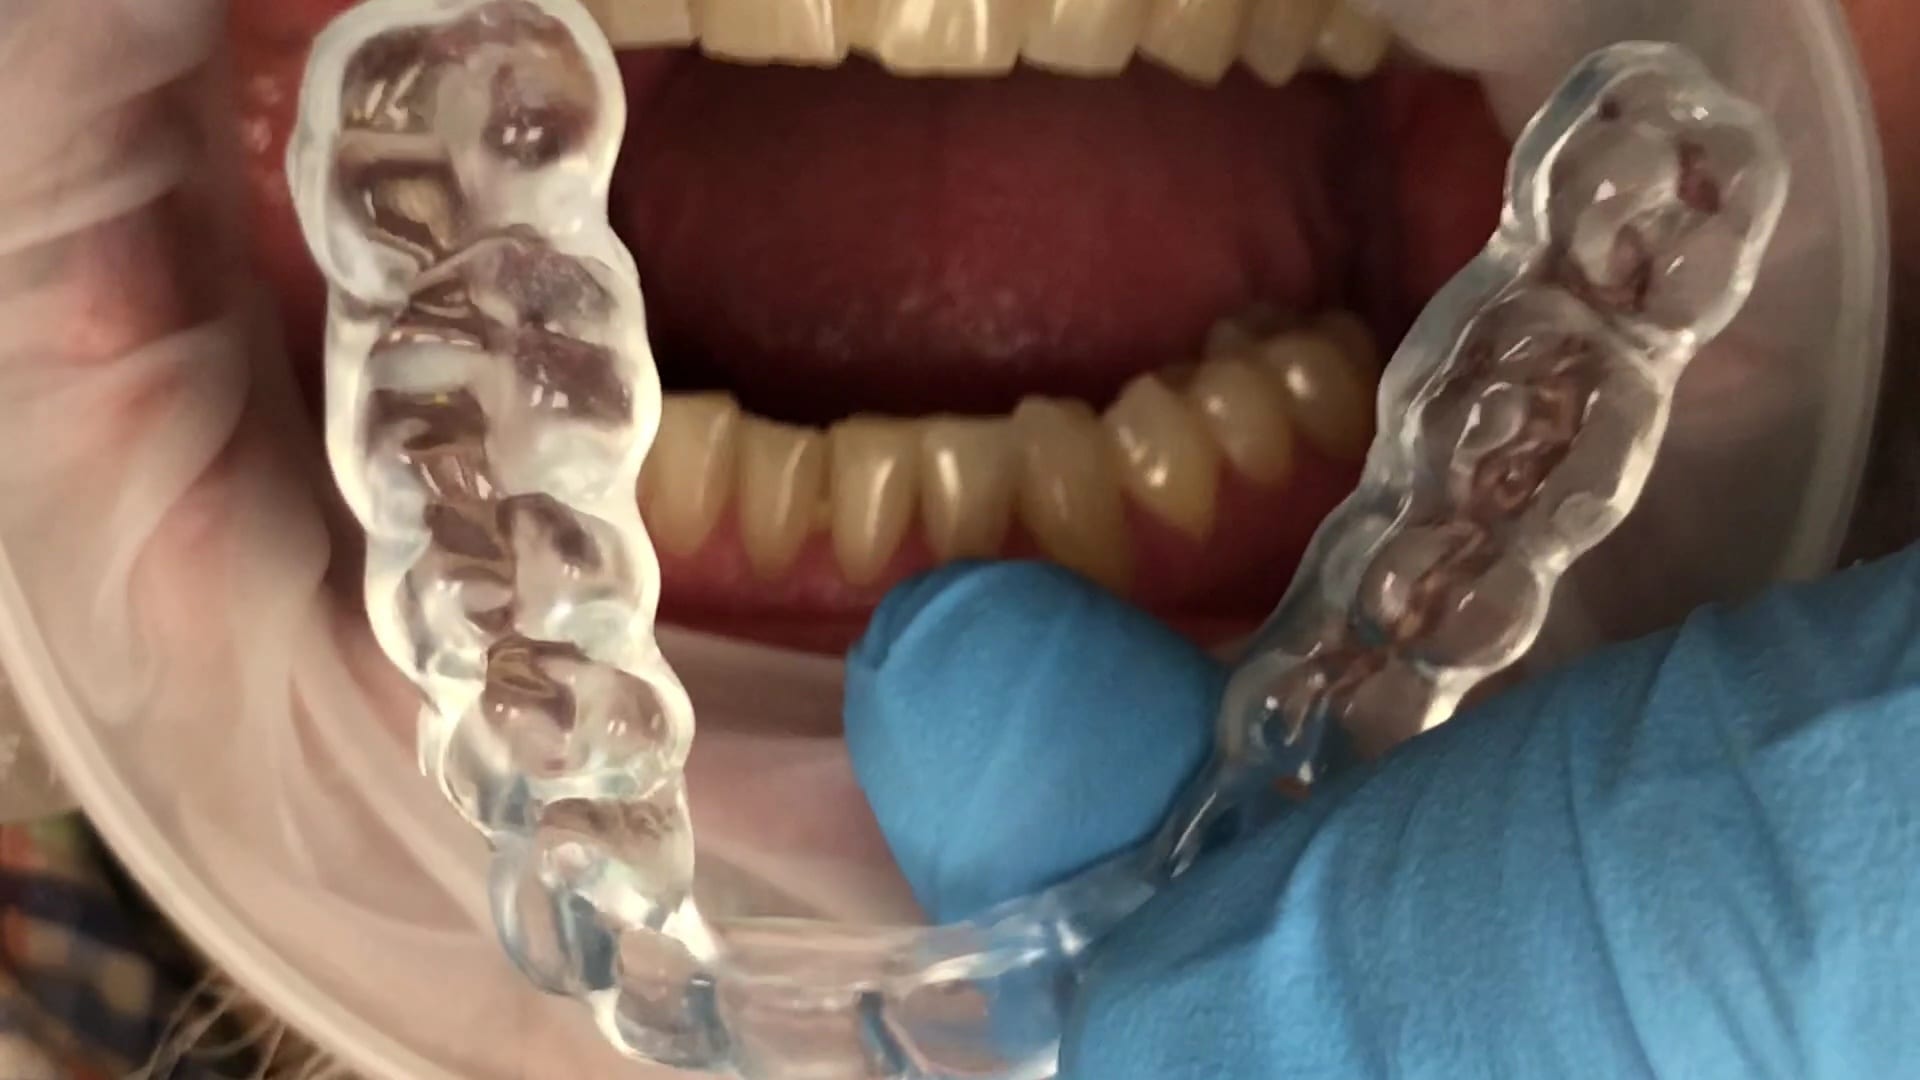 Digitally Desgined and Milled Occlusal Guard